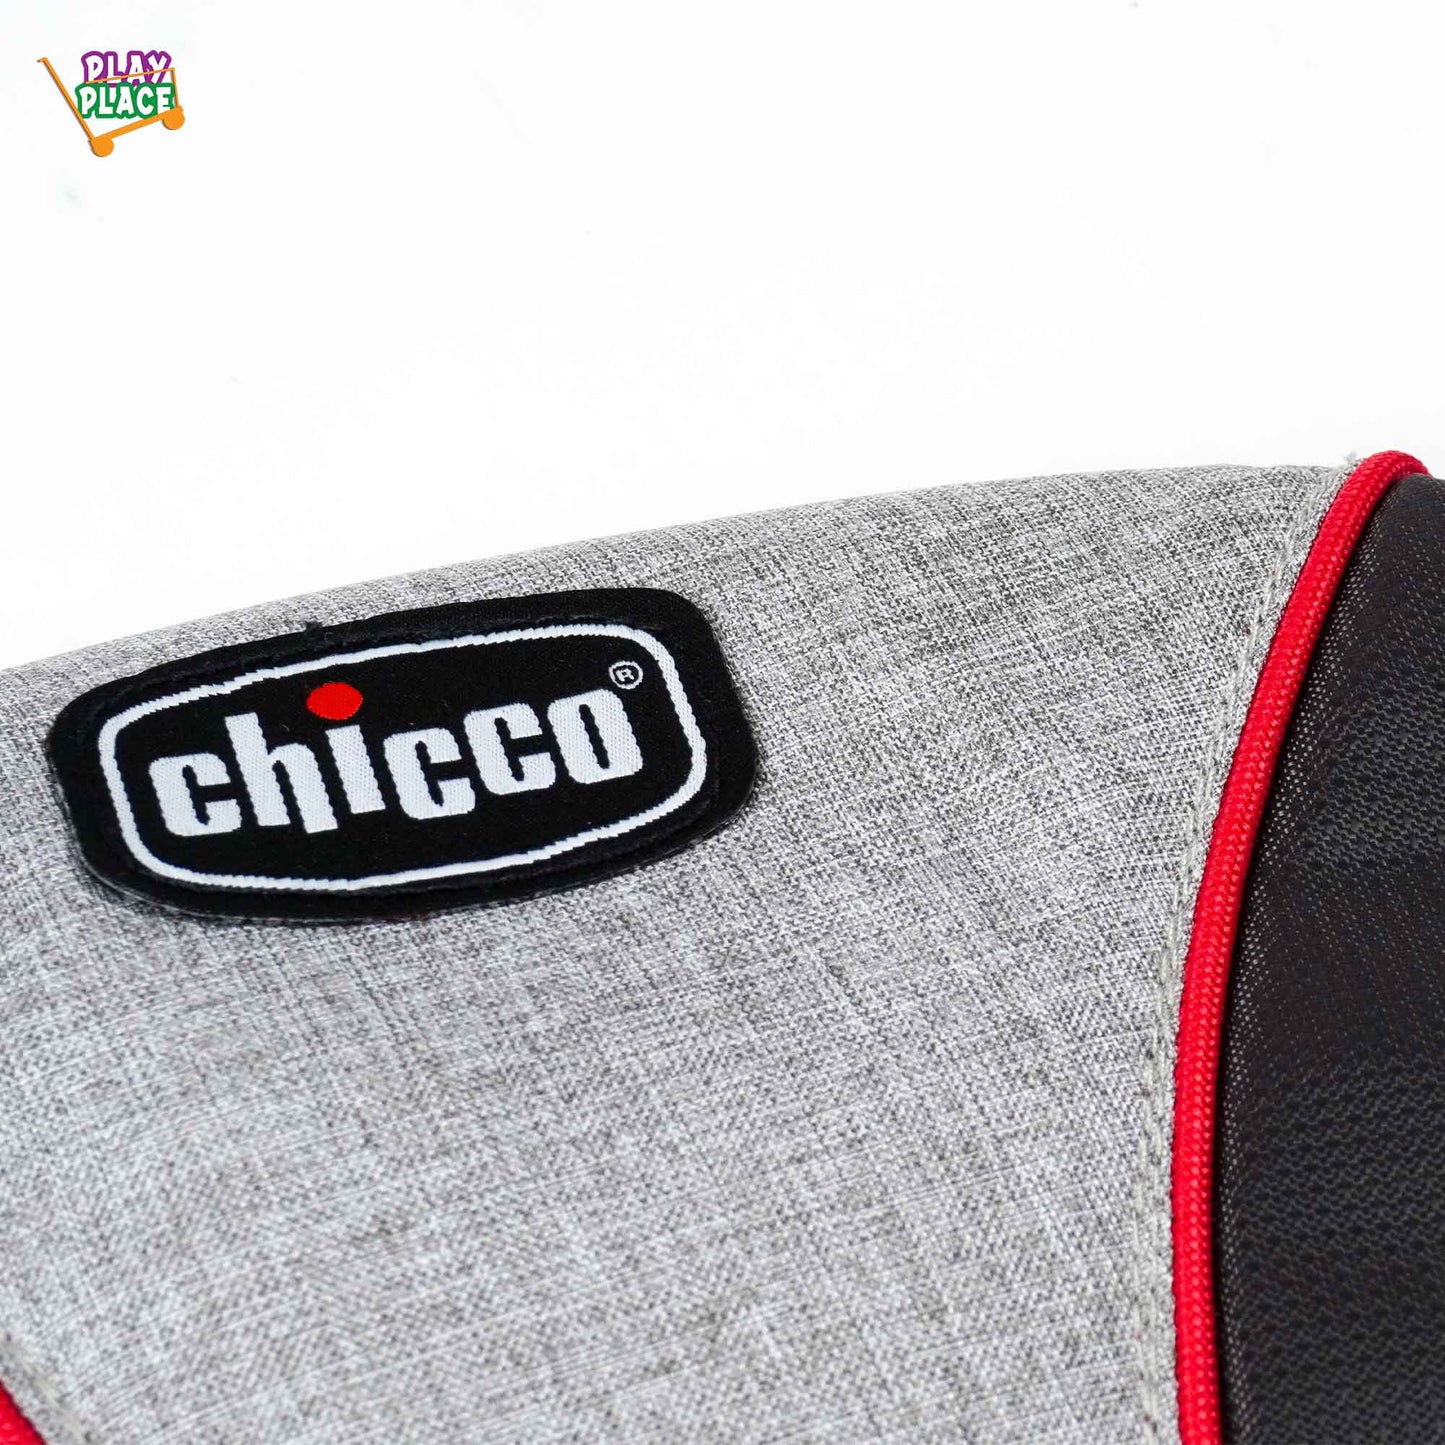 Chicco Ultra soft 2-way Infant Carrier